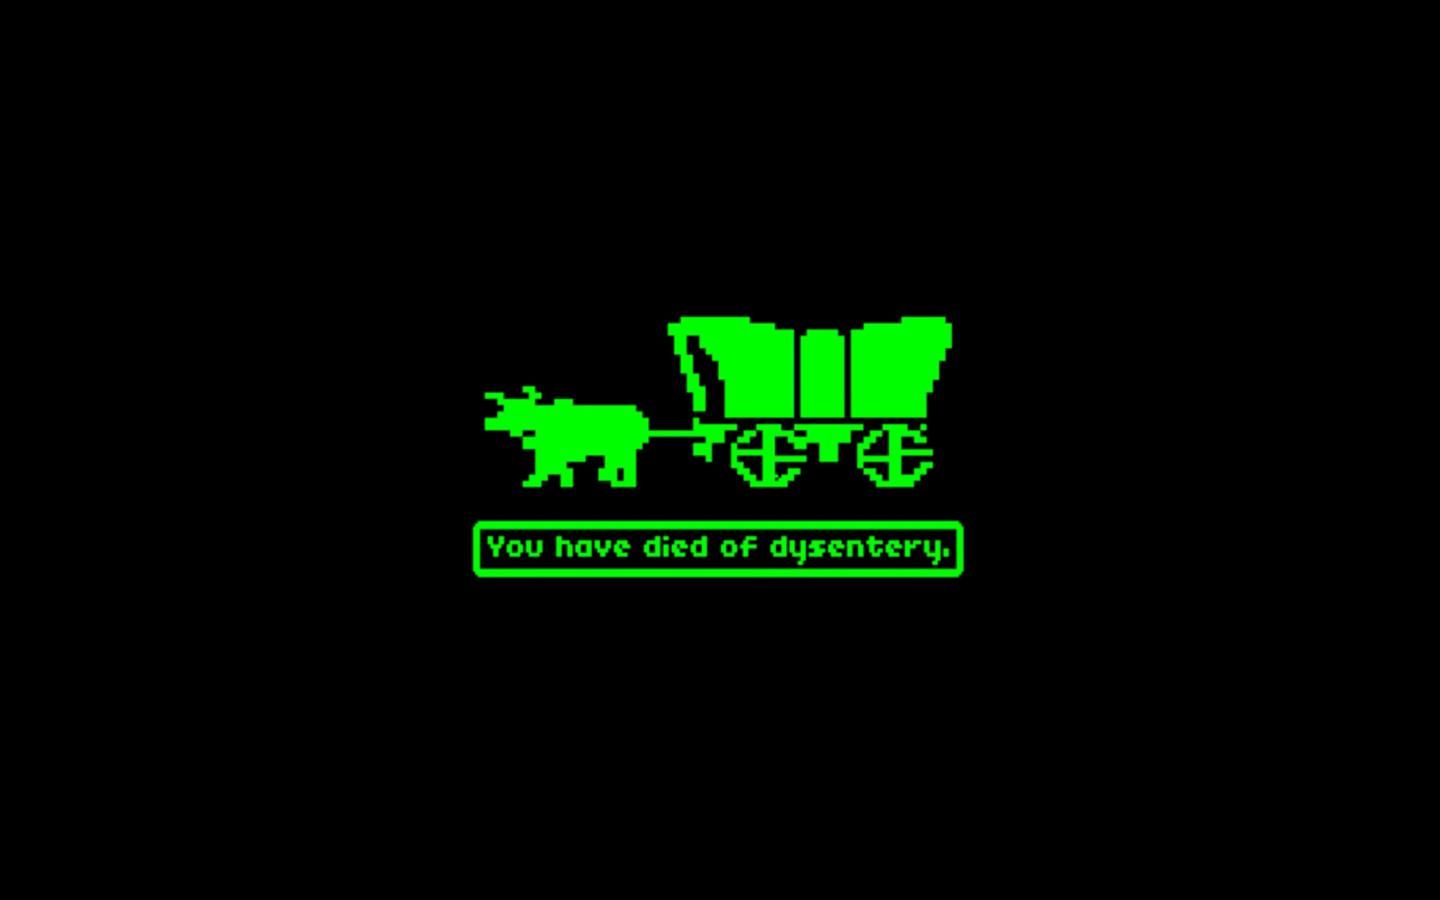 The Oregon Trail Wallpapers